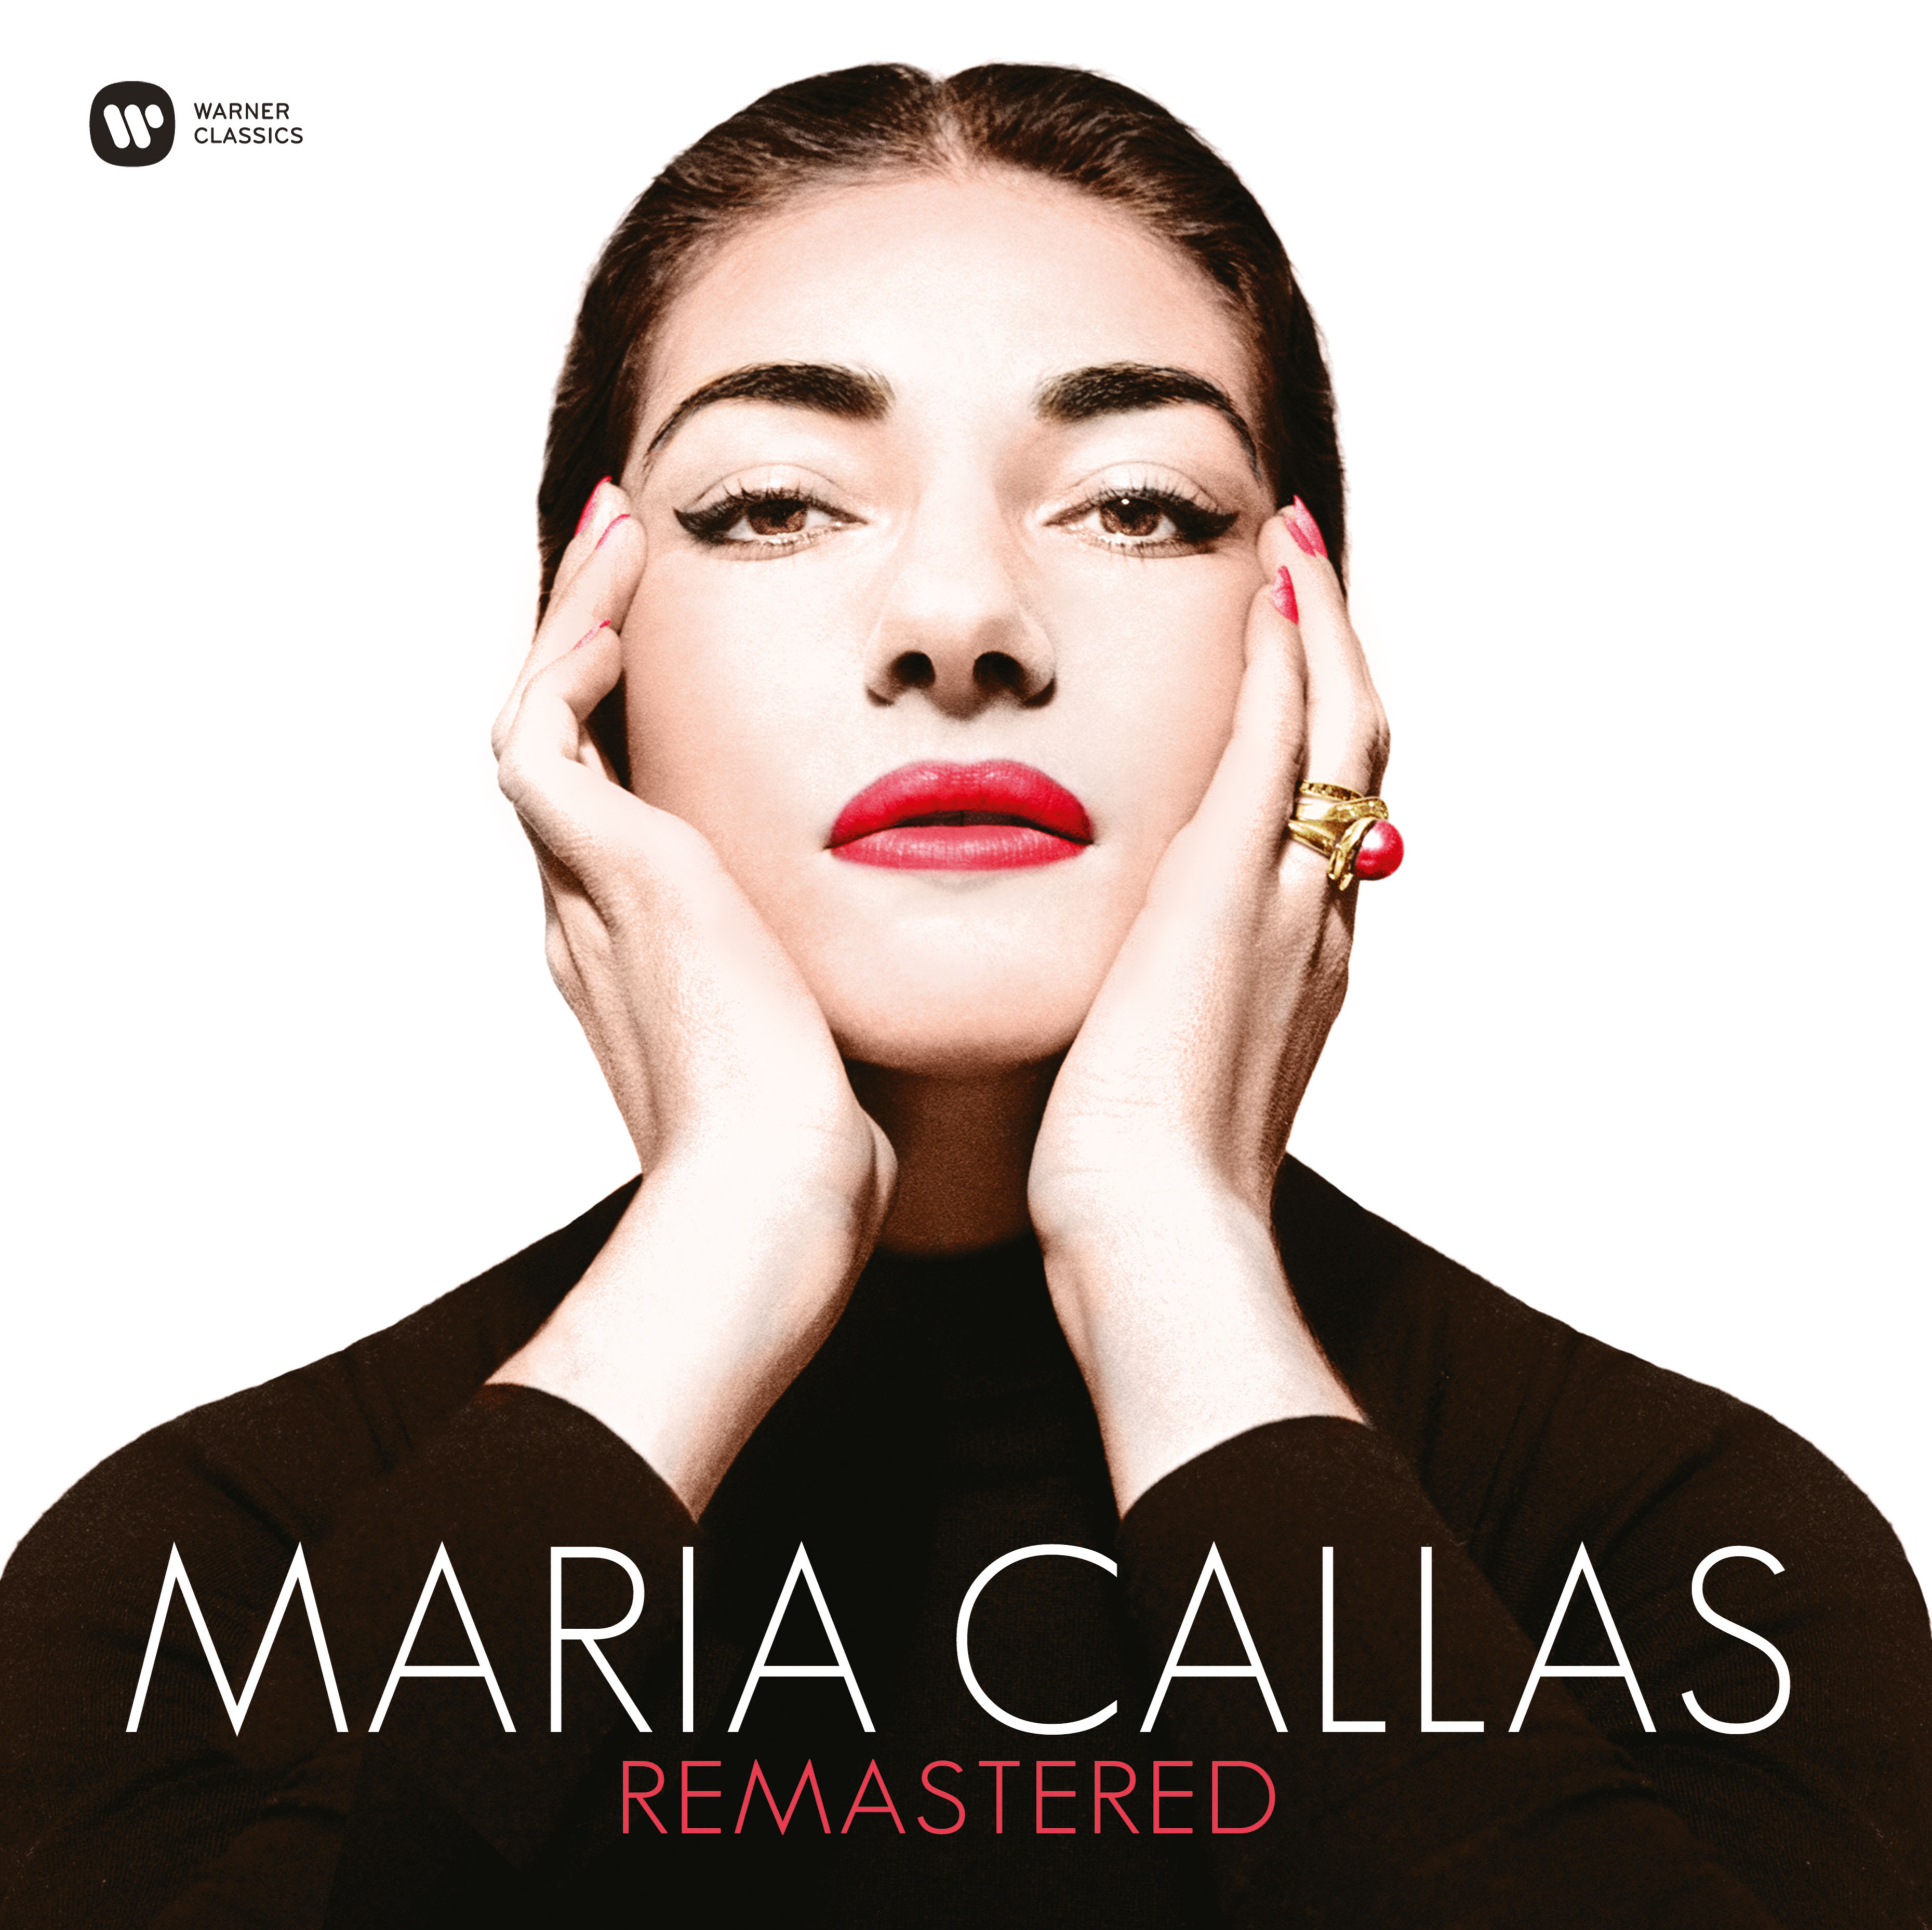 maria by callas nl subs torrent